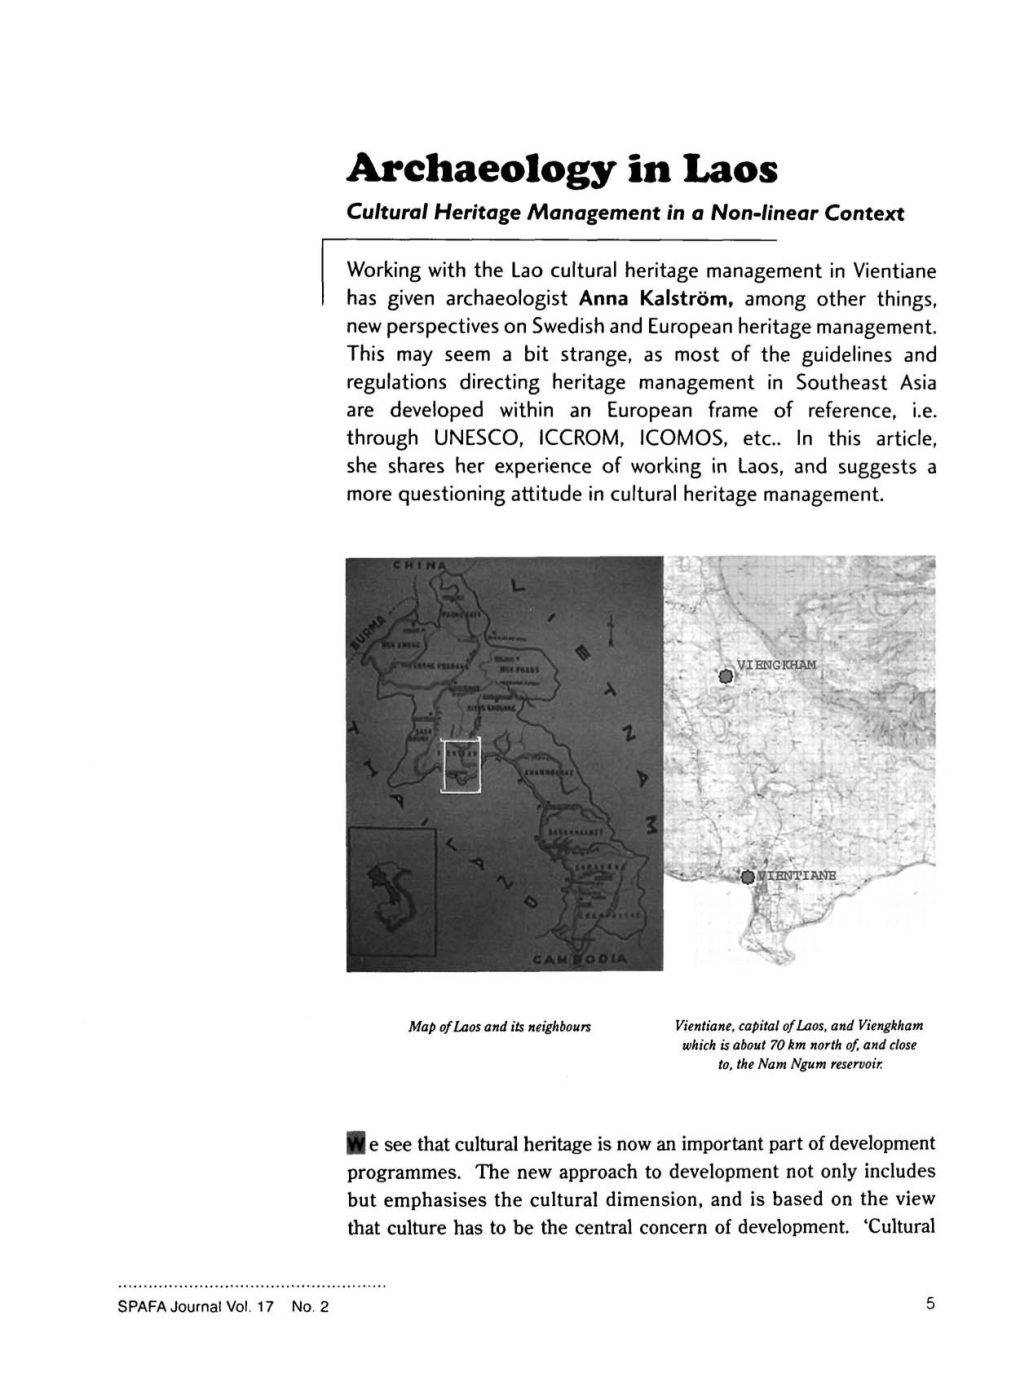 Archaeology in Laos Cultural Heritage Management in a Non-Linear Context